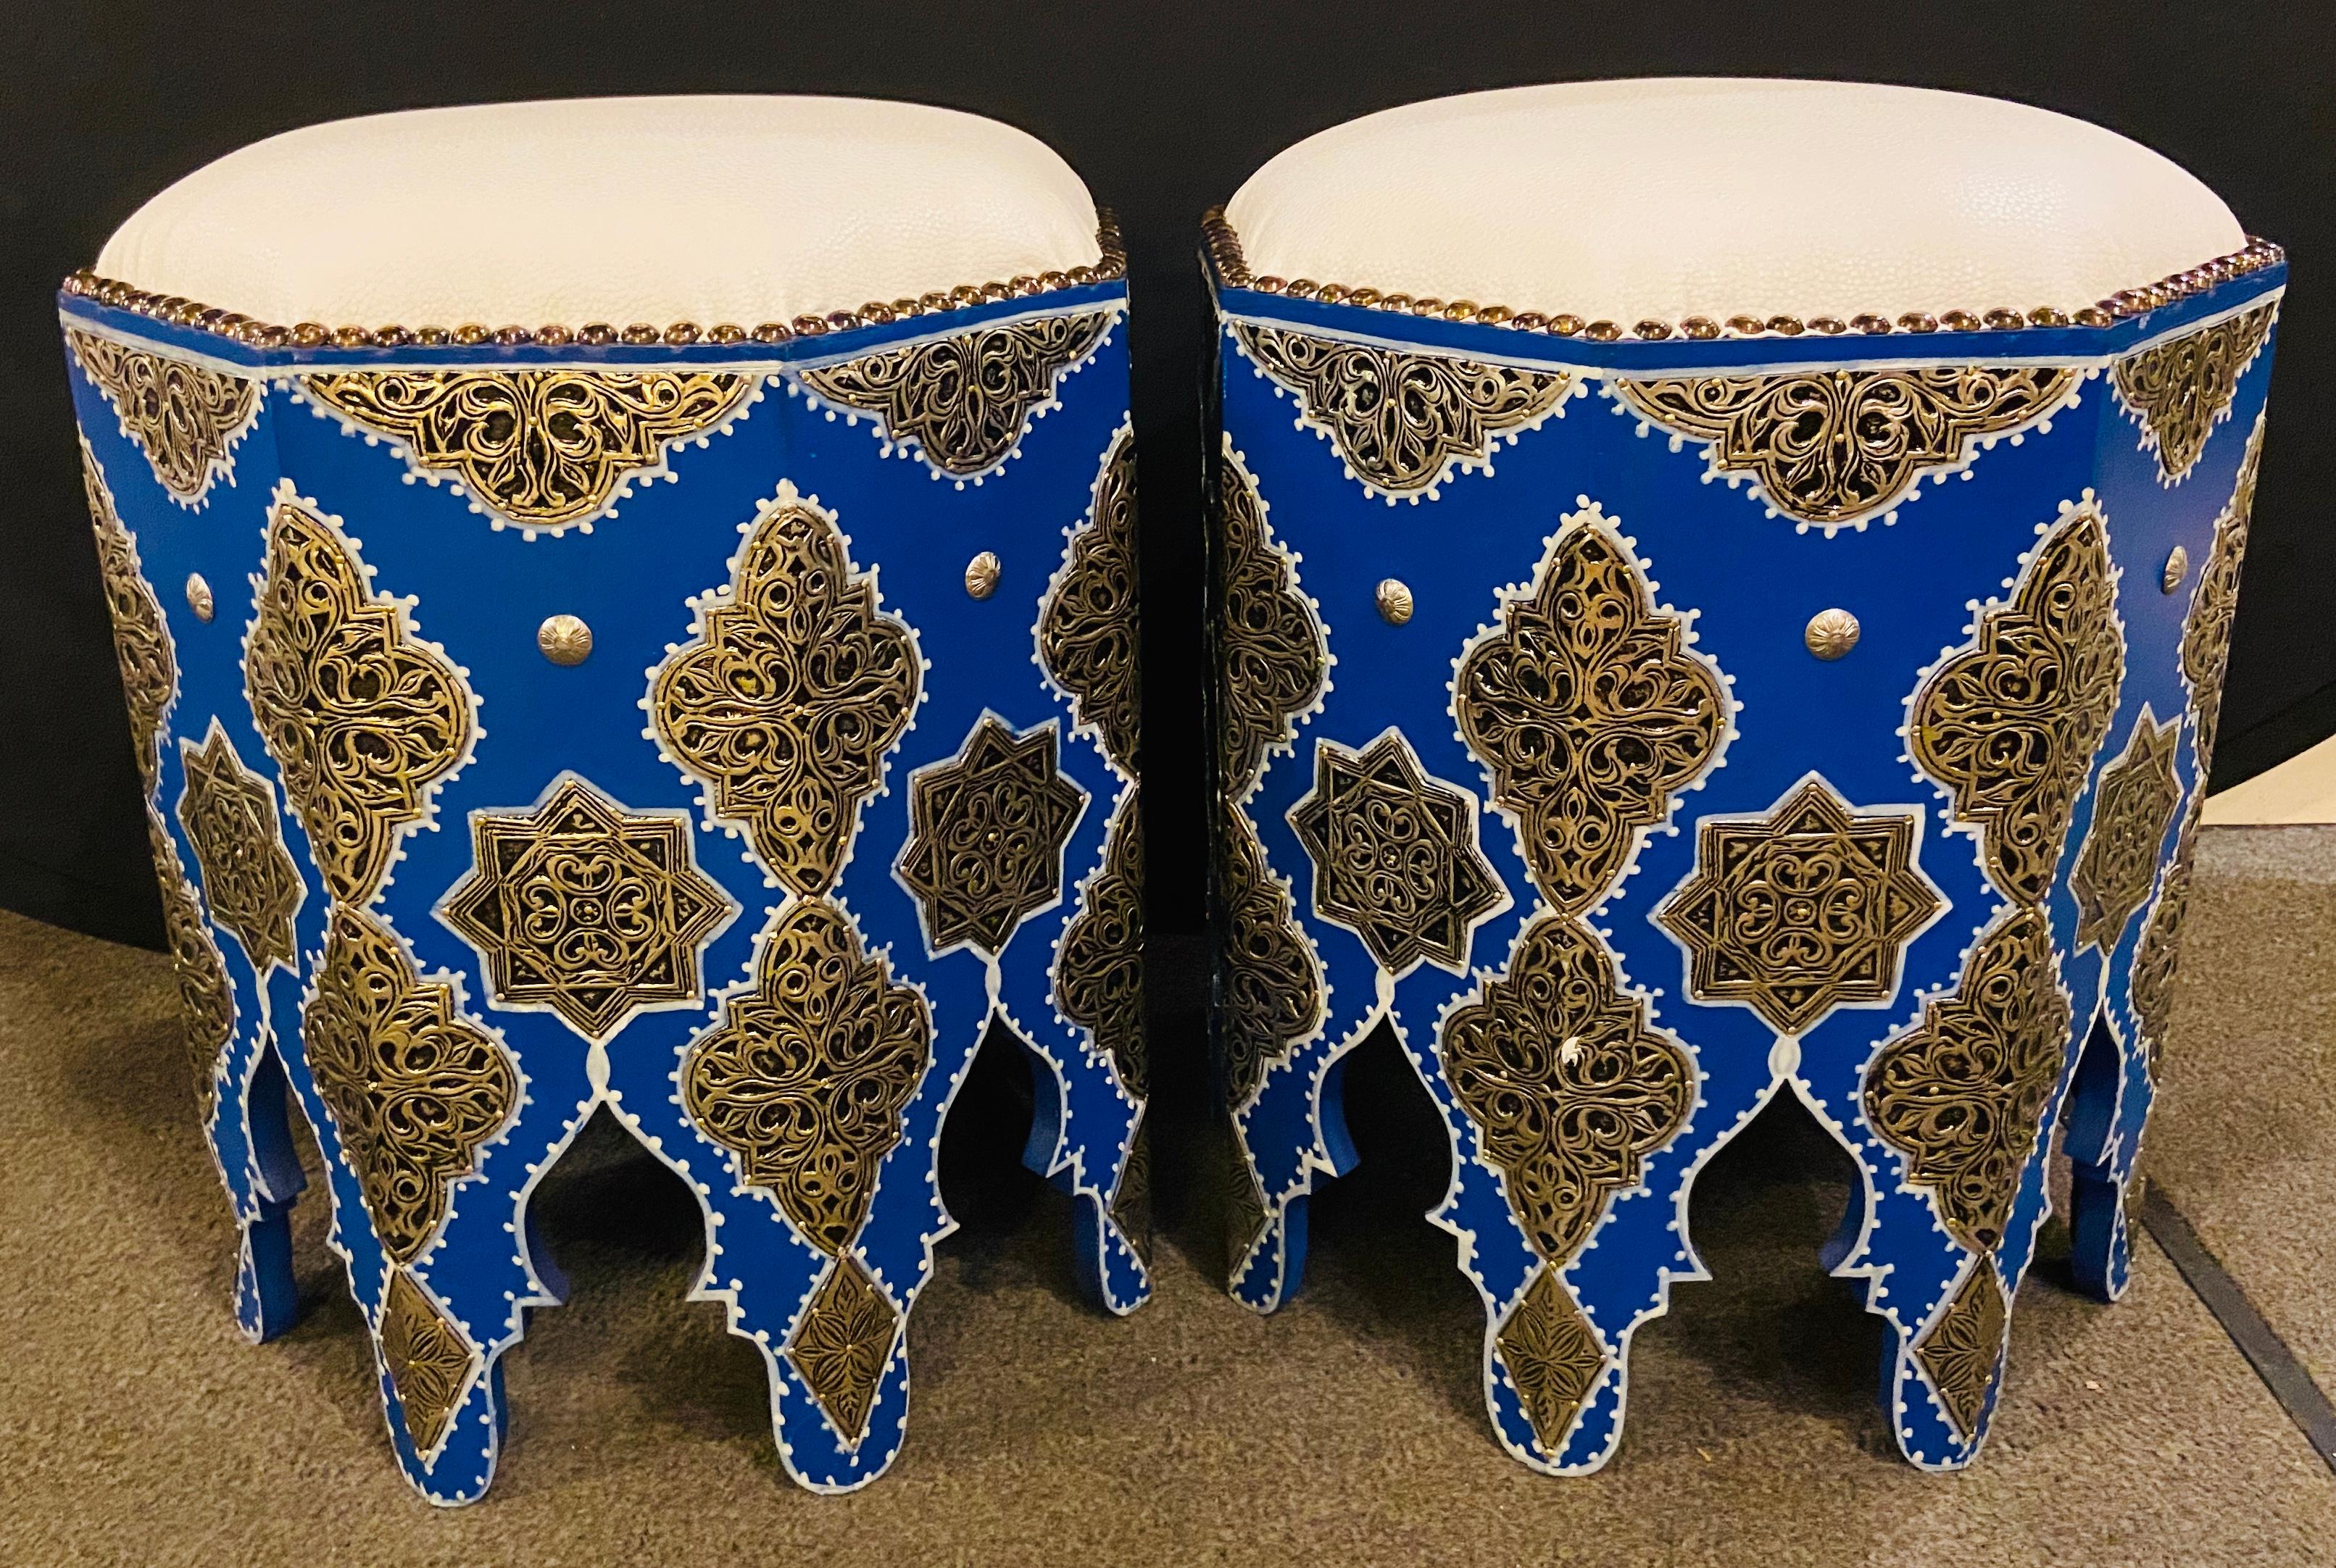 Late 20th Century Moroccan Blue Stool or Ottoman with White Leather Top, a Pair